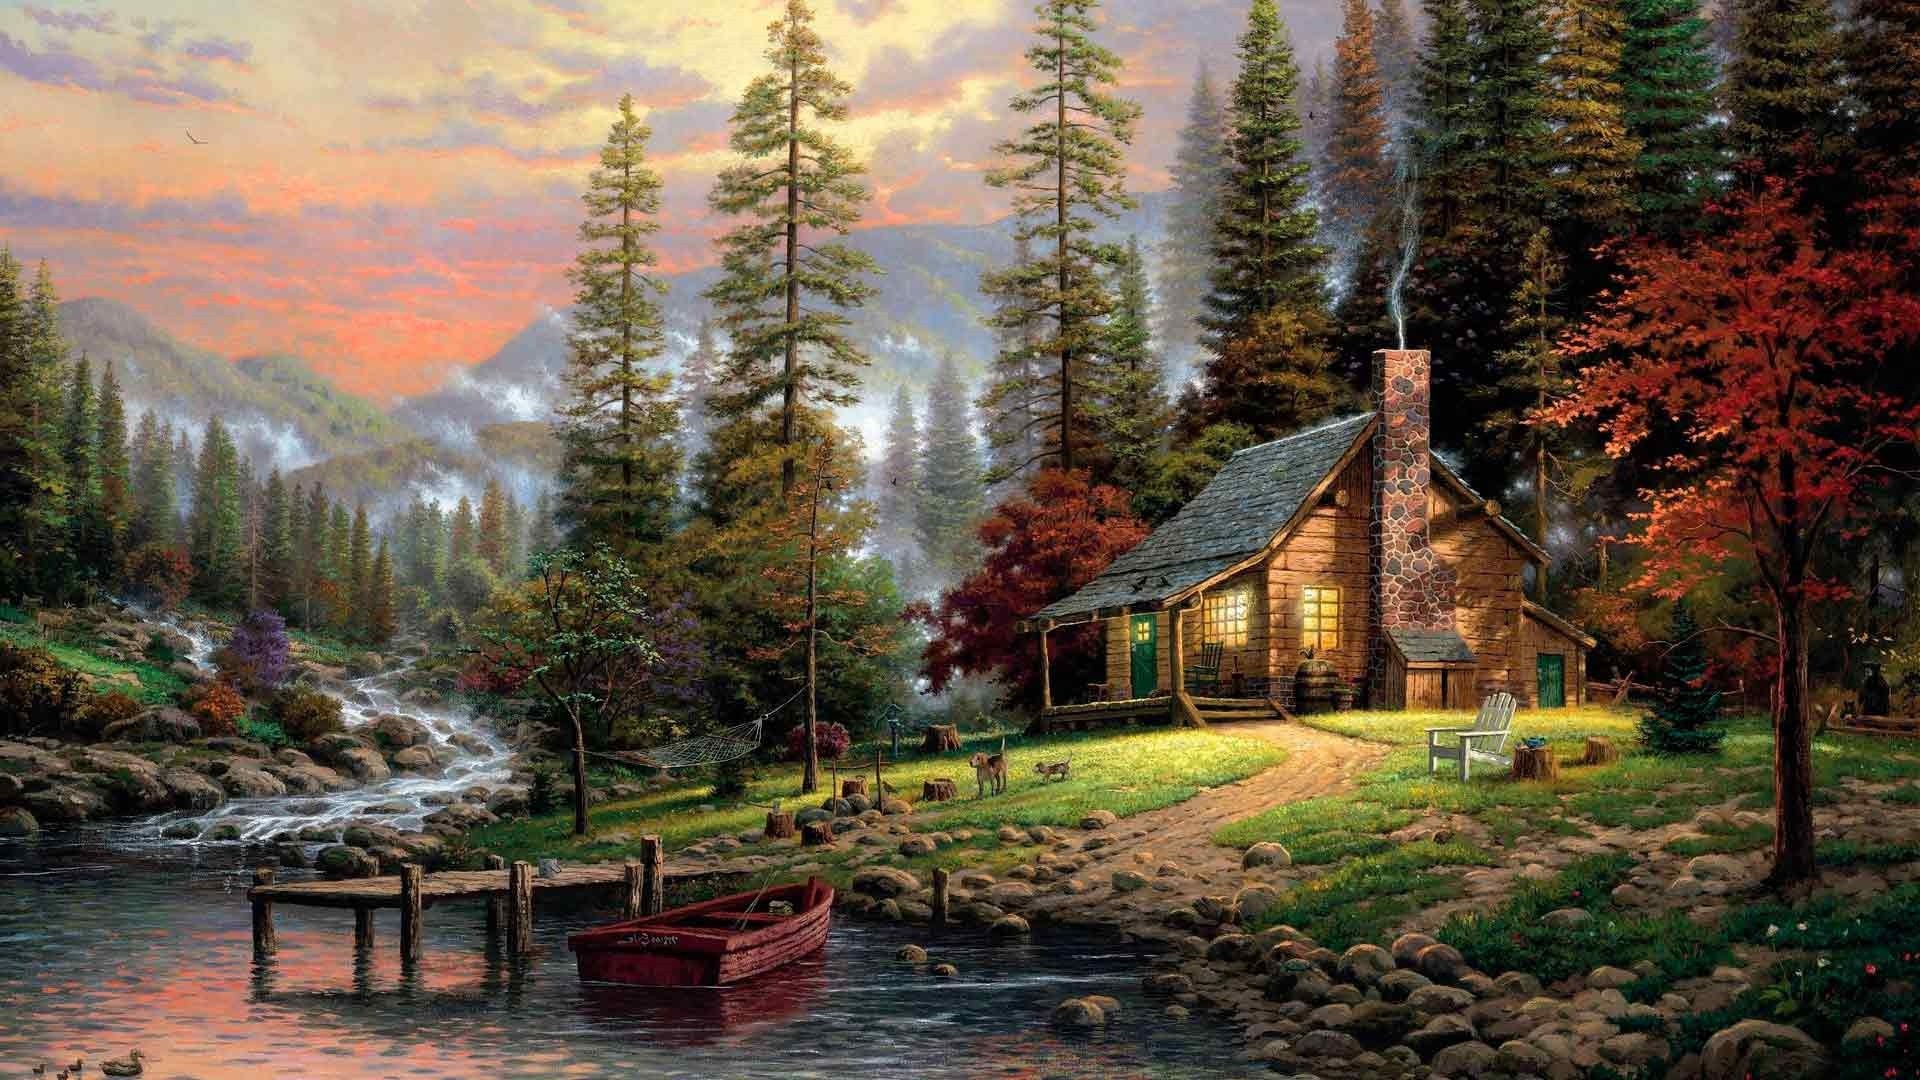 House By The River Art Wallpaper